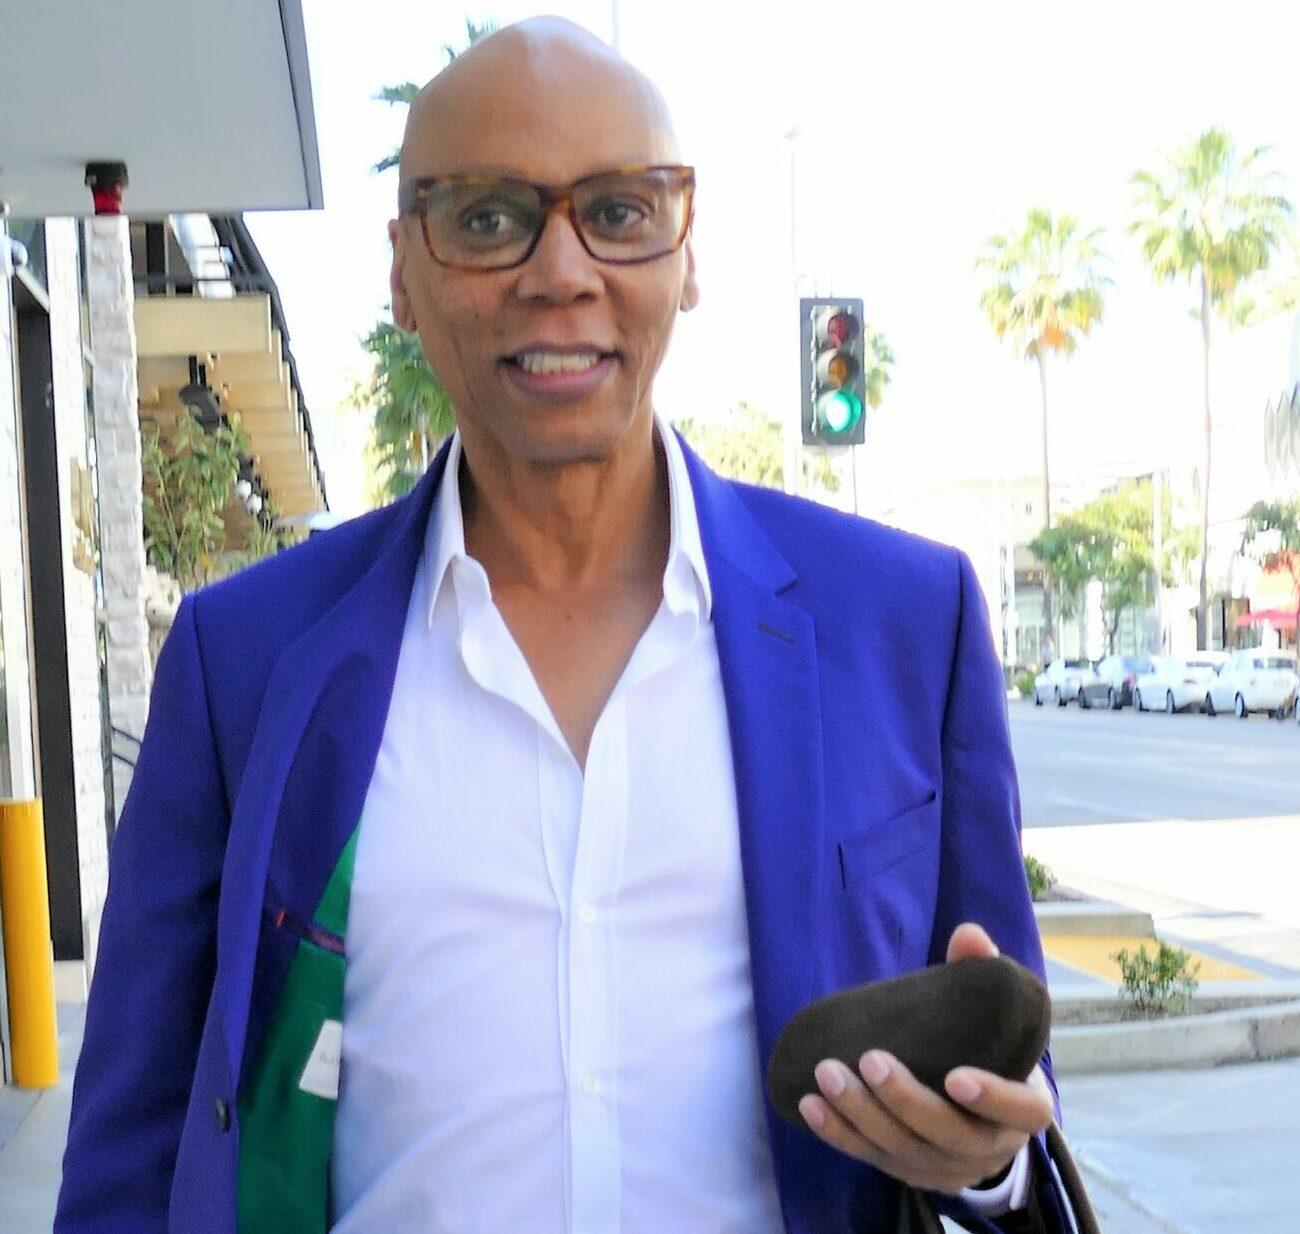 RuPaul leaving power lunch with producer Brian Grazer.